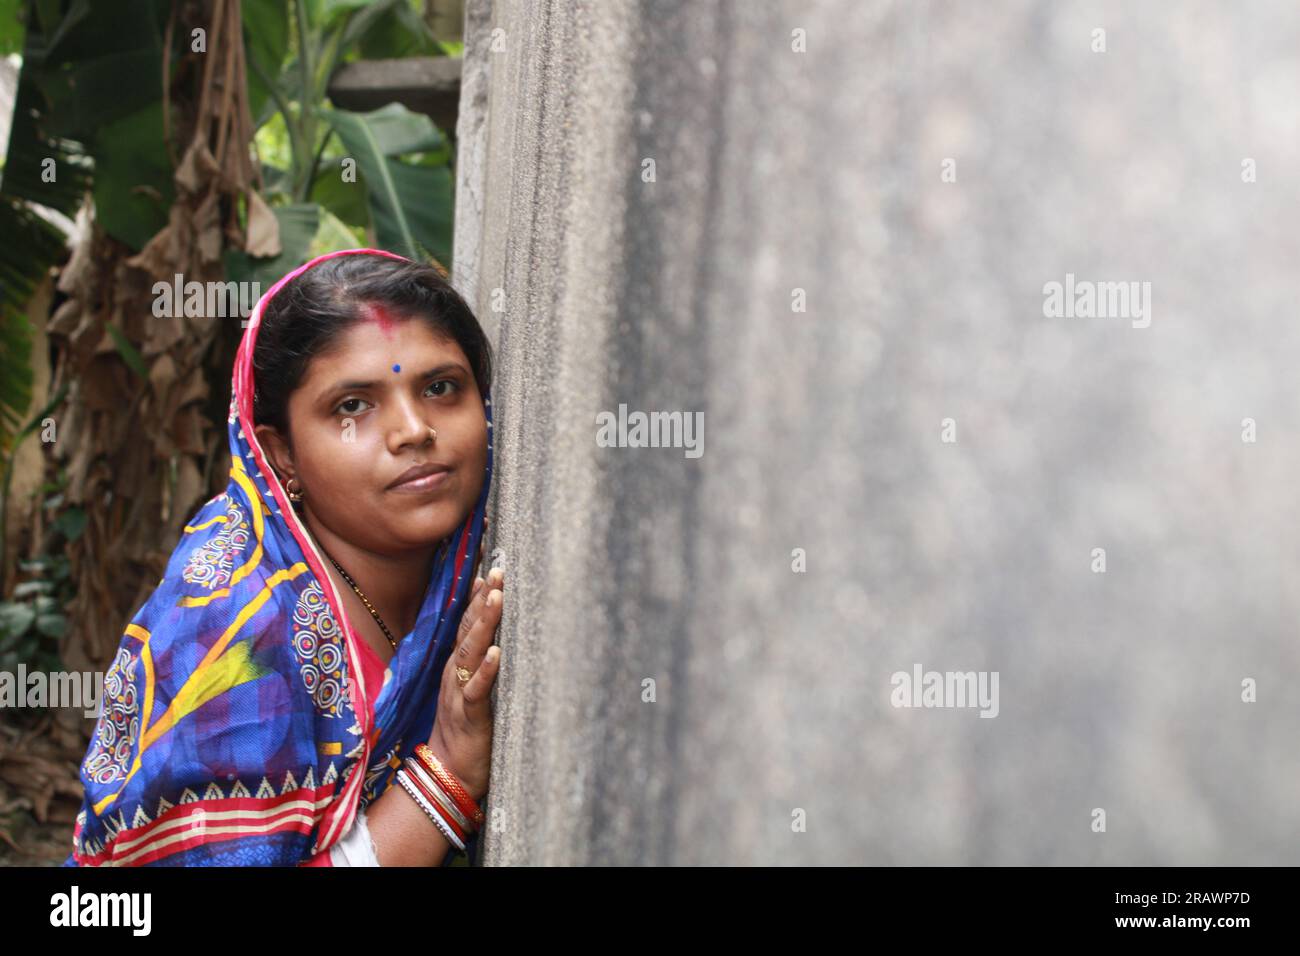 Young indian woman against a grunge wall, smiling and happy, being confident and friendly. Stock Photo